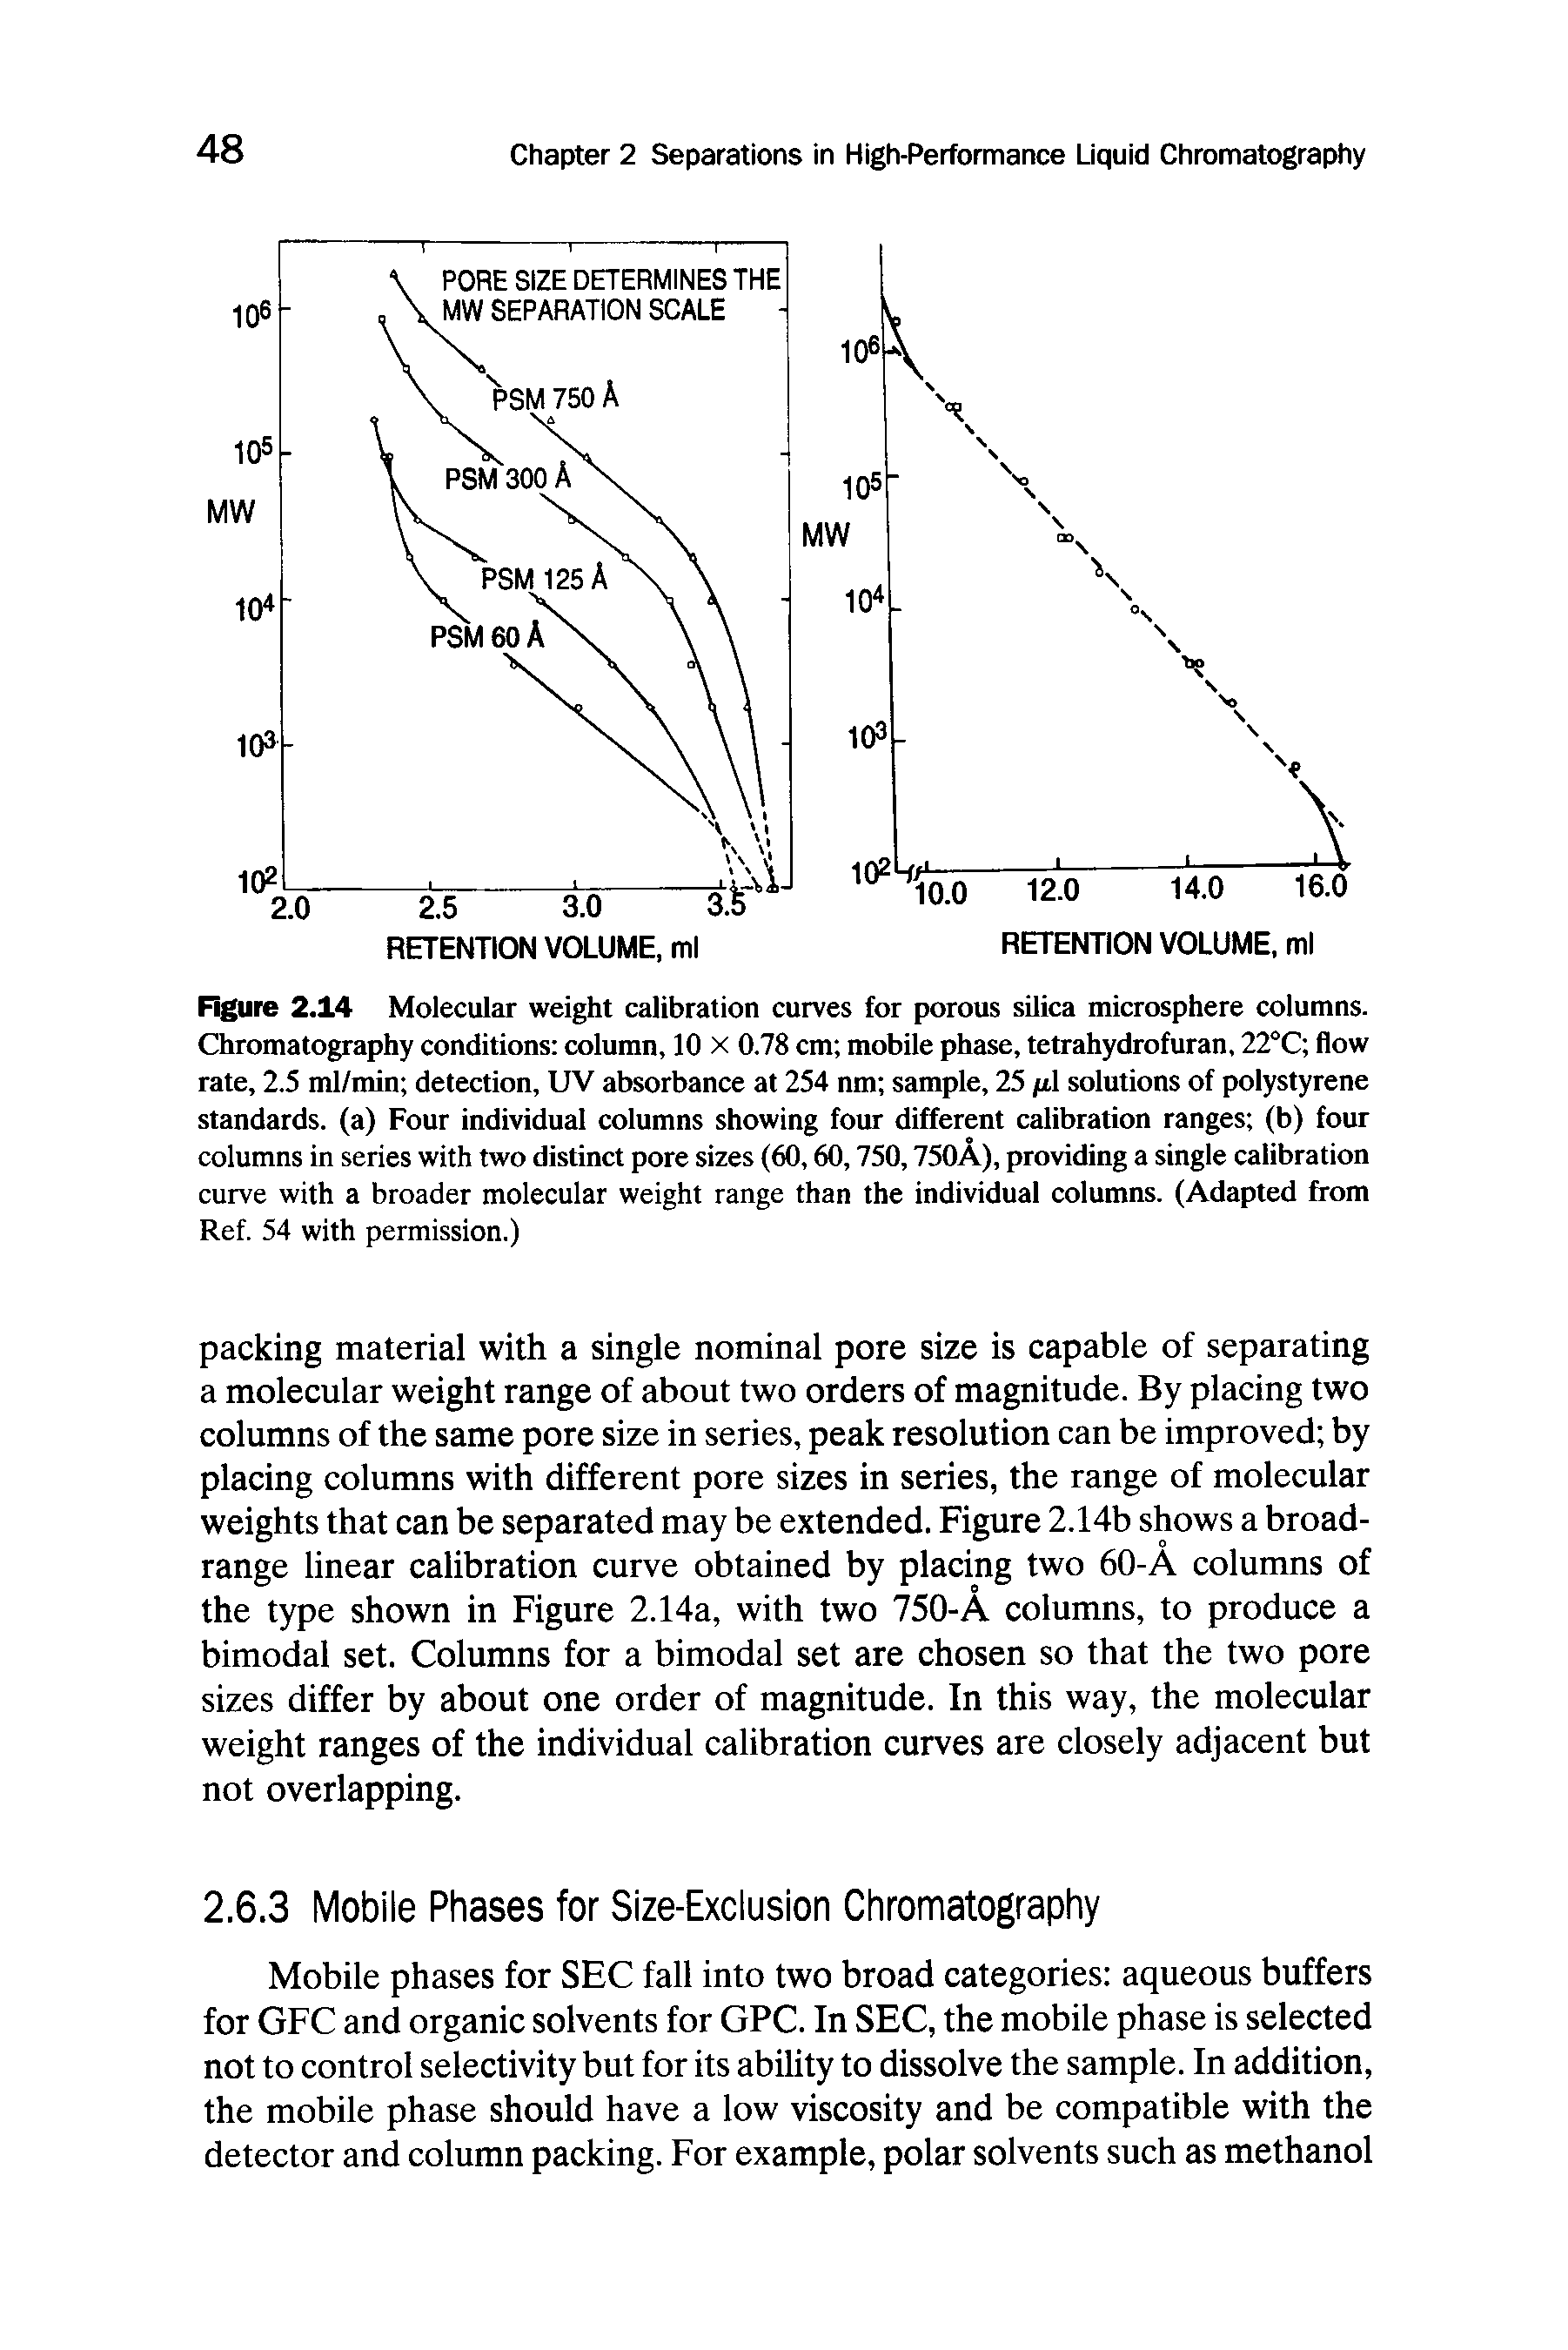 Figure 2.14 Molecular weight calibration curves for porous silica microsphere columns. Chromatography conditions column, 10 X 0.78 cm mobile phase, tetrahydrofuran, 22°C flow rate, 2.5 ml/min detection, UV absorbance at 254 nm sample, 25 pi solutions of polystyrene standards, (a) Four individual columns showing four different calibration ranges (b) four columns in series with two distinct pore sizes (60,60,750,750A), providing a single calibration curve with a broader molecular weight range than the individual columns. (Adapted from Ref. 54 with permission.)...